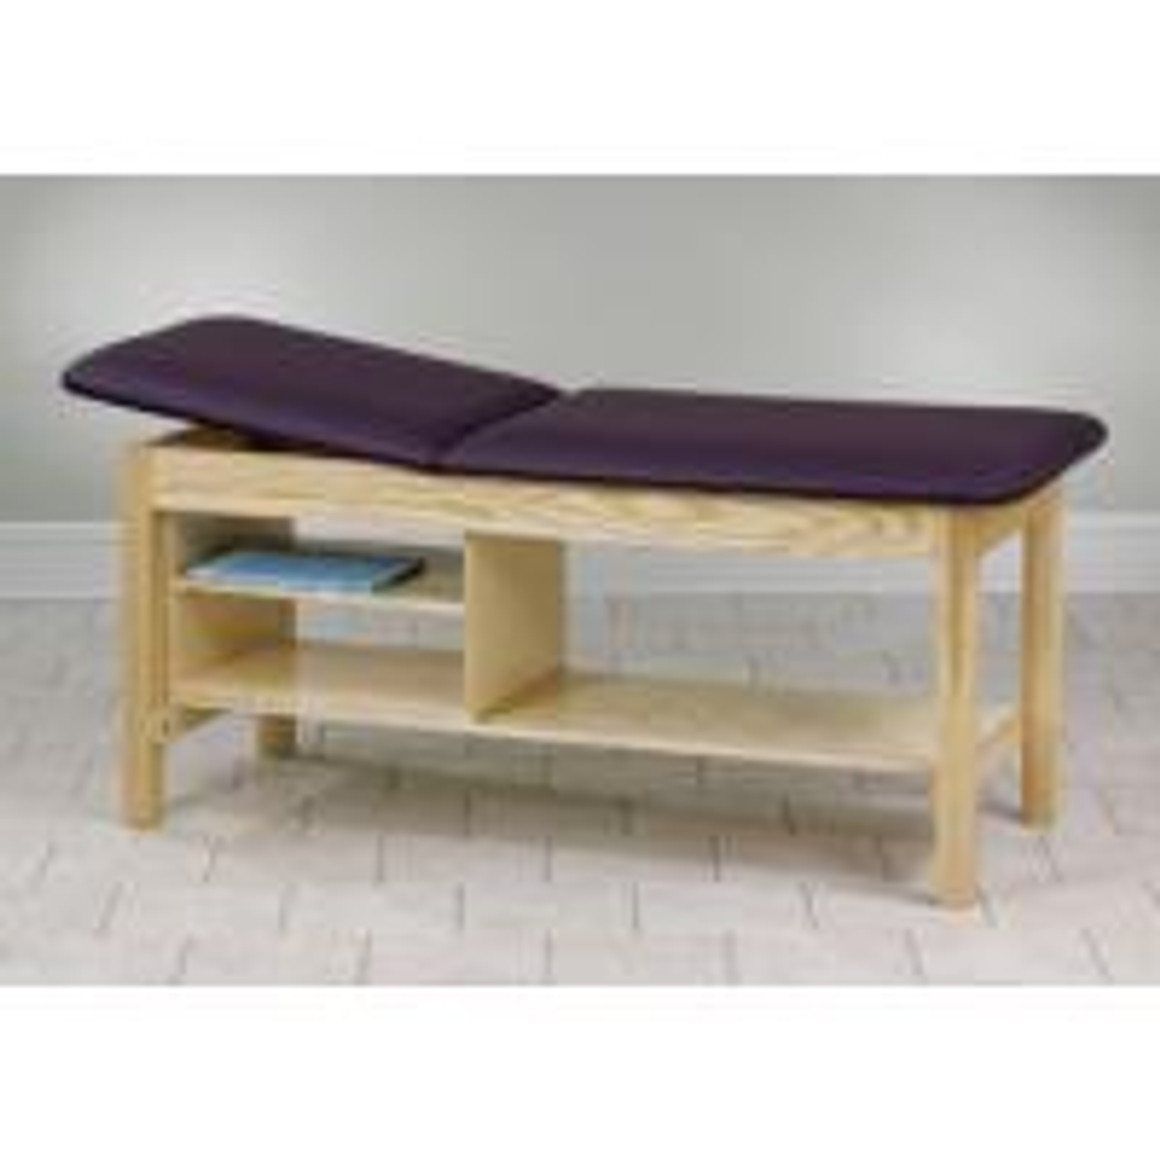 Clinton Classic Series Straight Line Treatment Table with Shelving Unit, 30" Wide, Clamshell